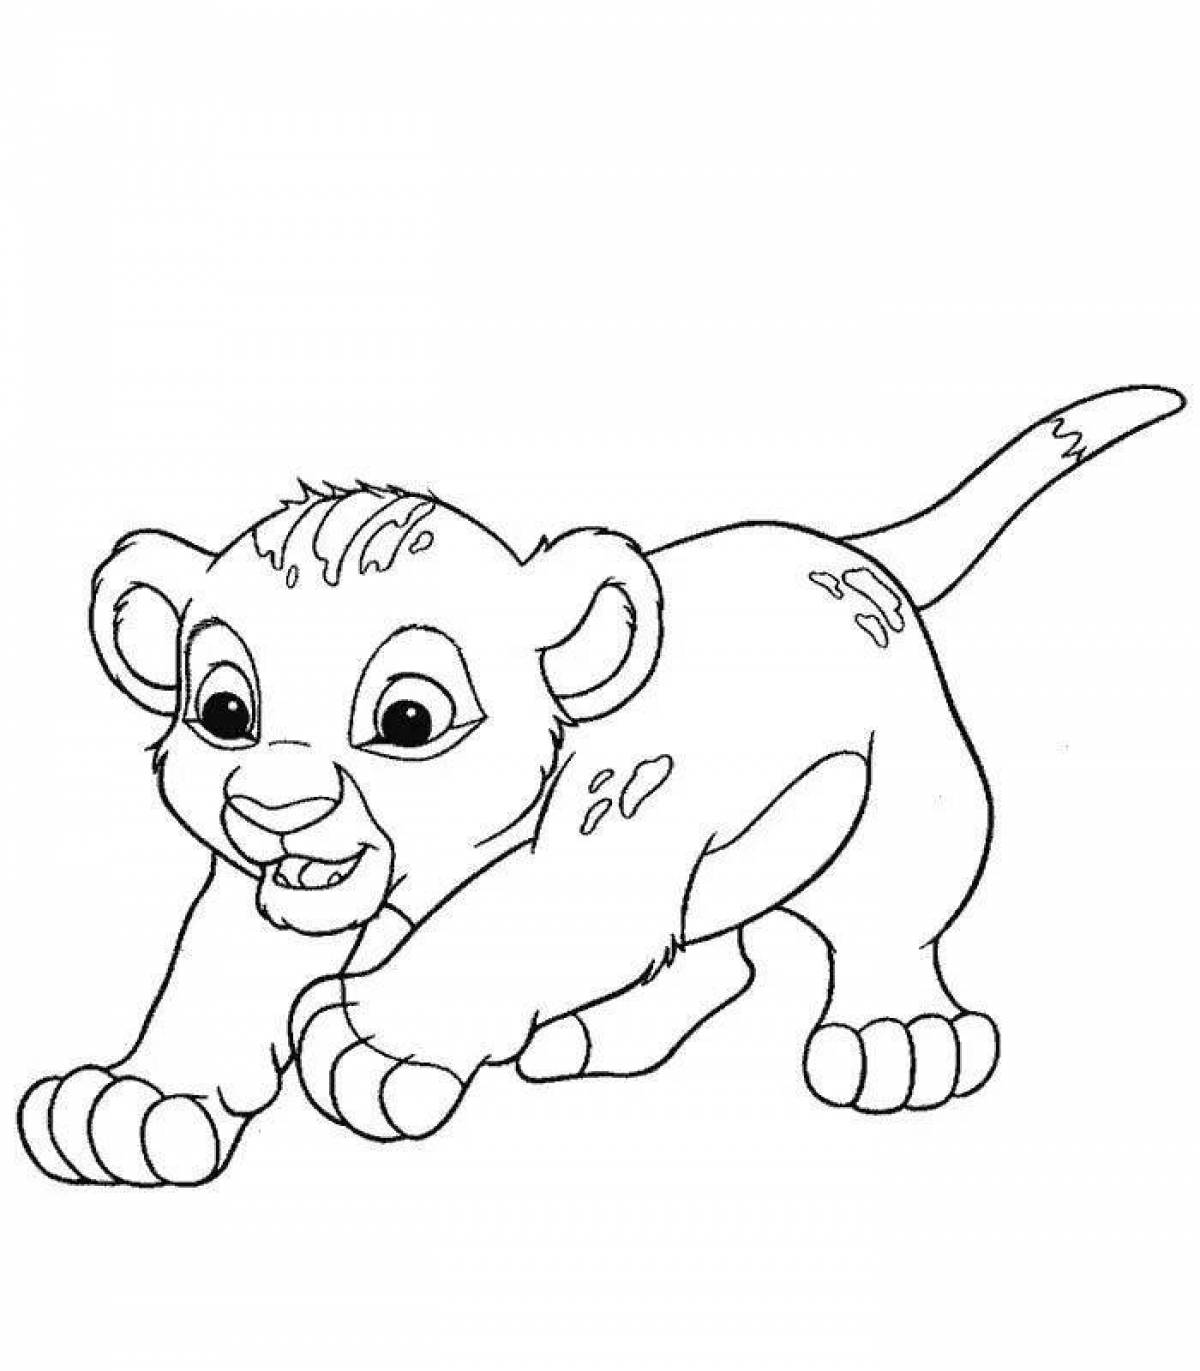 Coloring page of a sociable lion cub